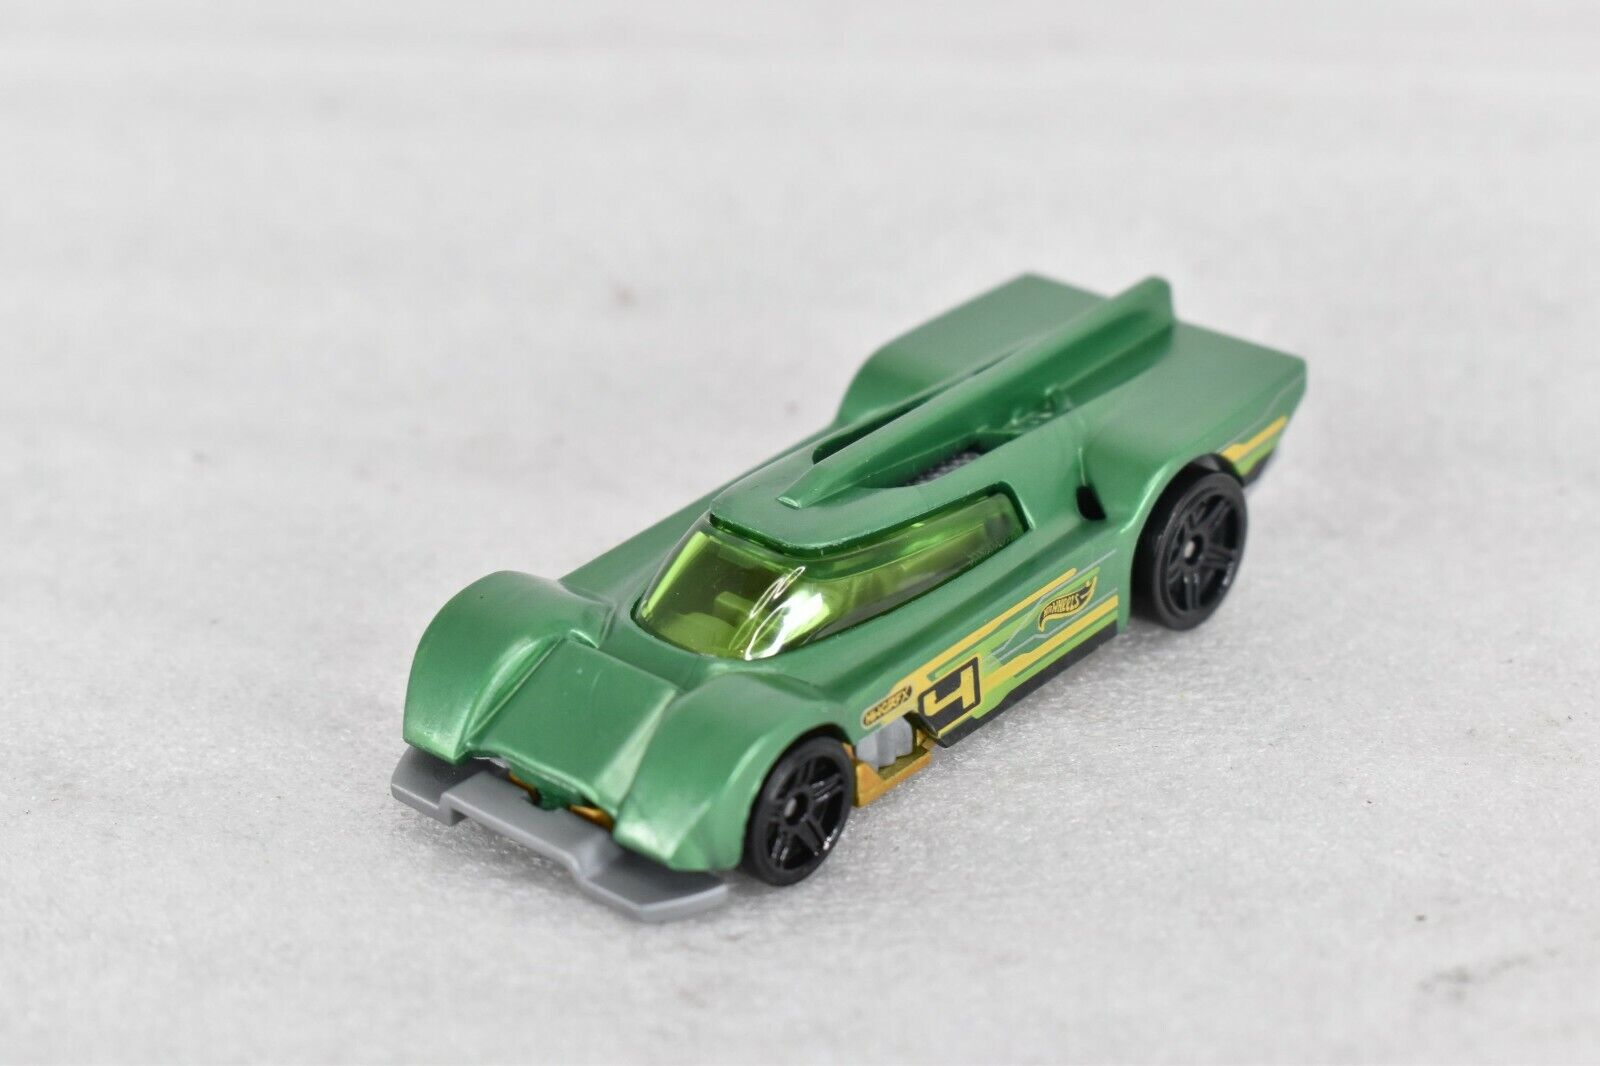 GRUPPO x24 ✰ green/gold/gray✰Multi Exclusive?✰2021 Hot Wheels LOOSE